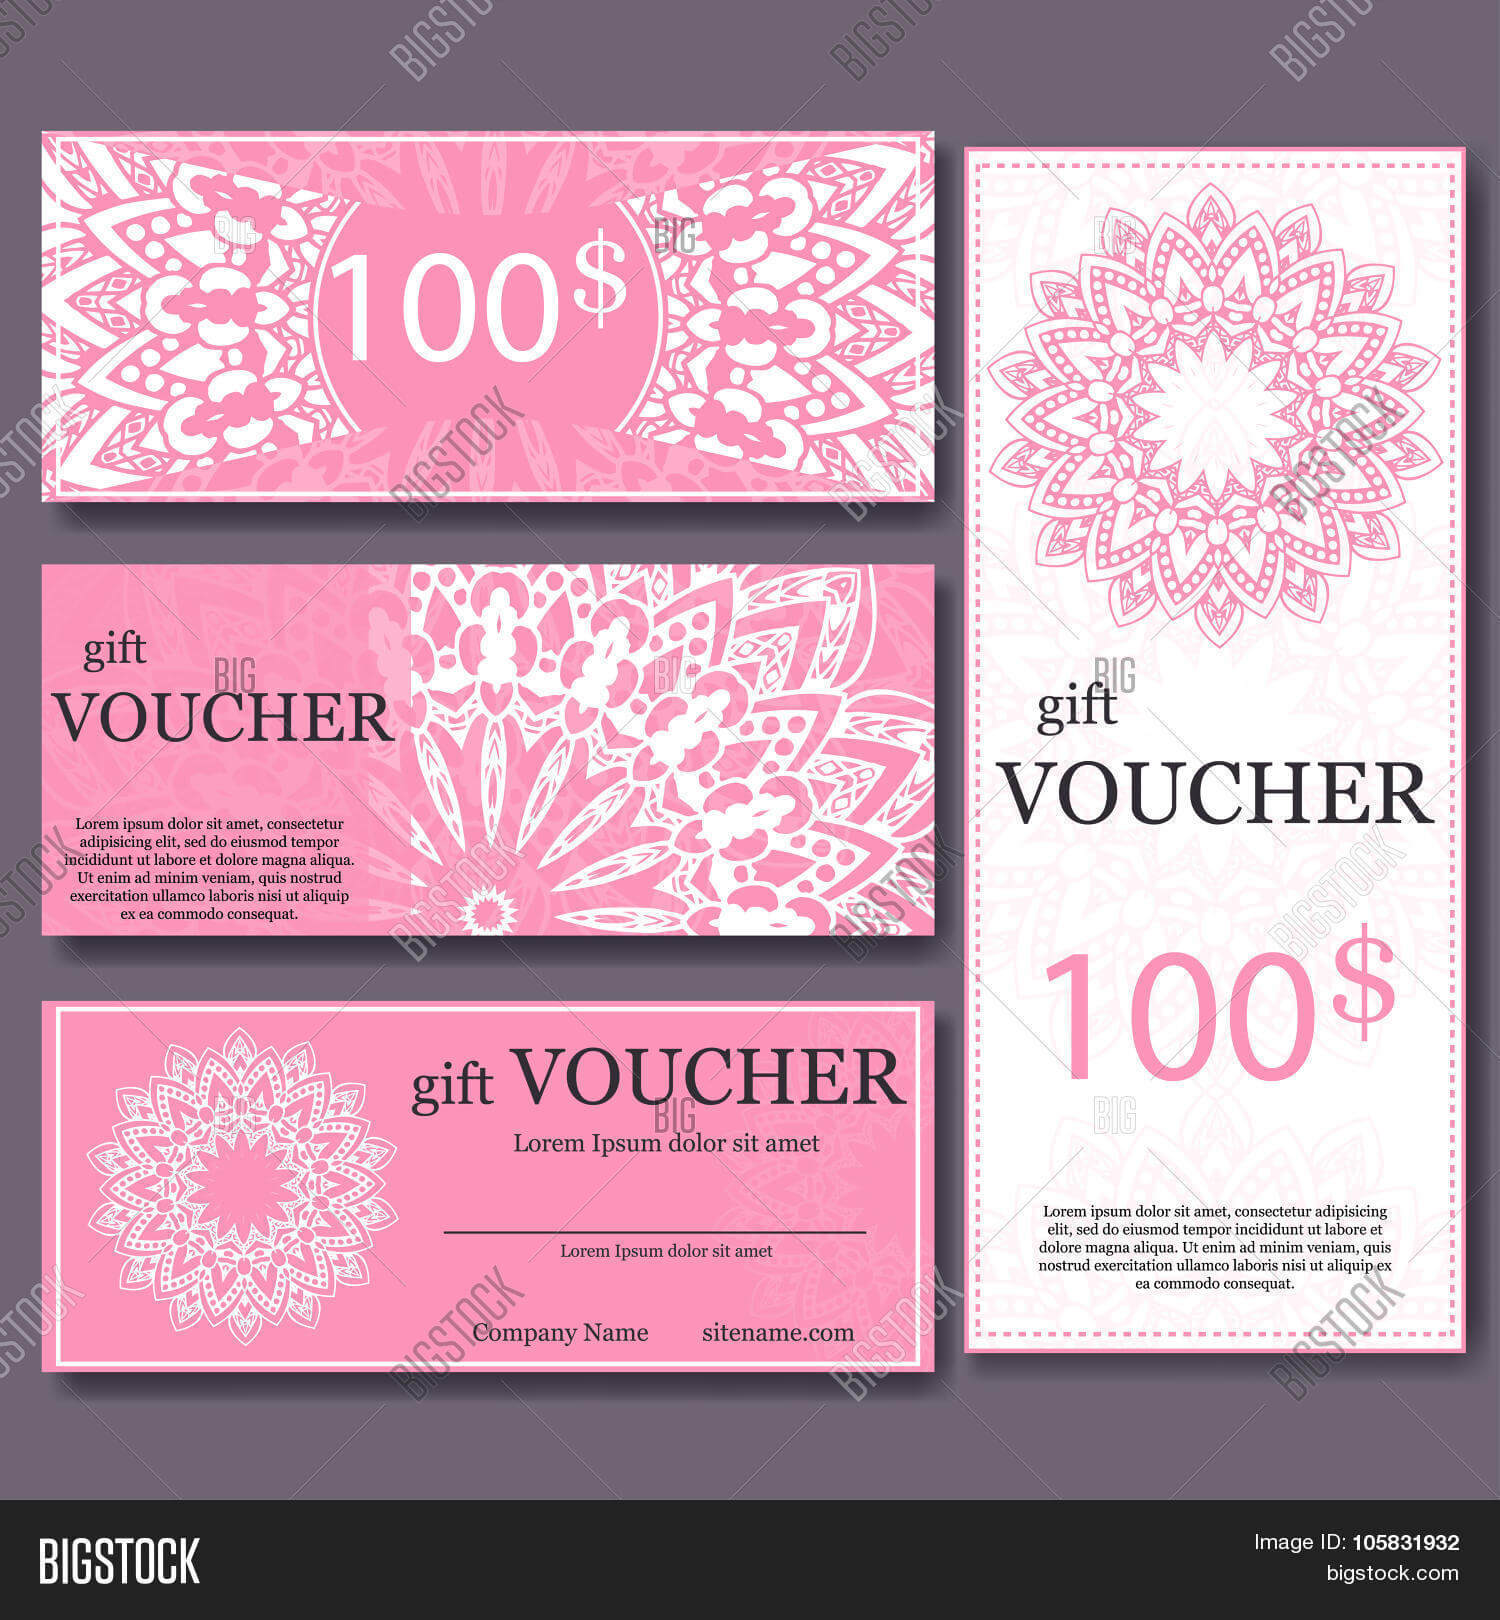 Gift Voucher Template Vector & Photo (Free Trial) | Bigstock With Regard To Magazine Subscription Gift Certificate Template